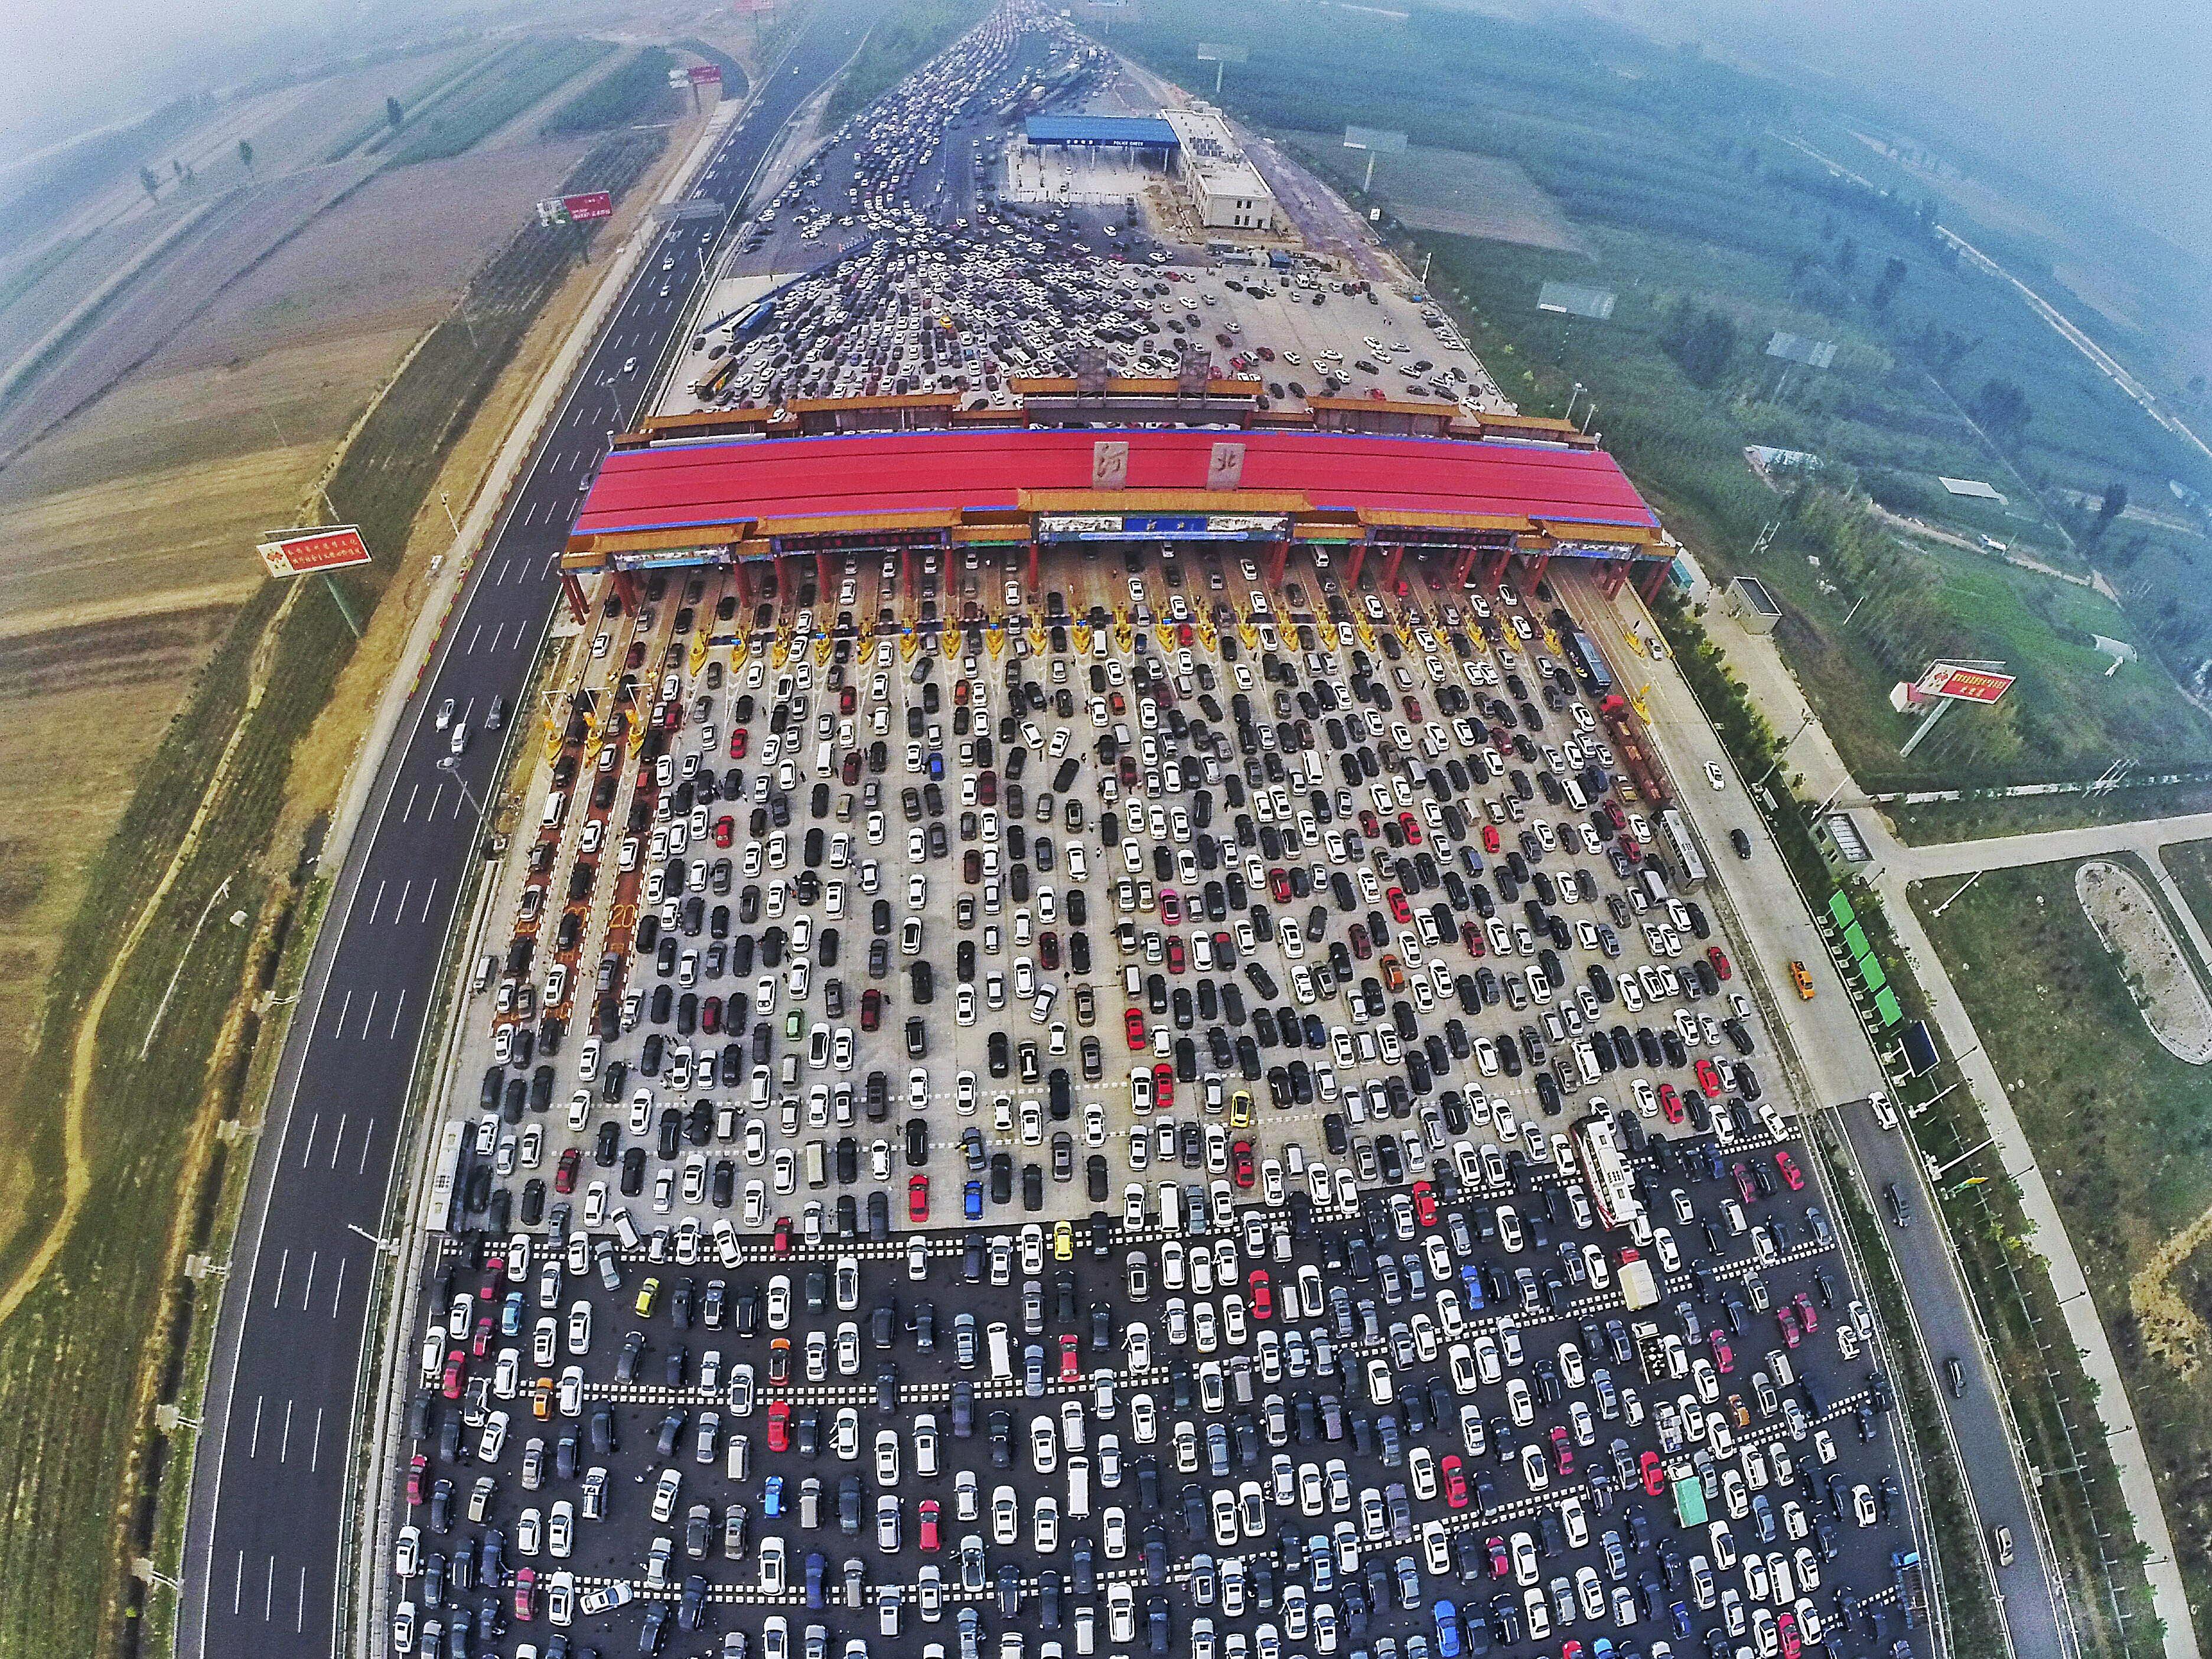 Vehicles are seen stuck in a traffic jam near a toll station as people return home at the end of a w